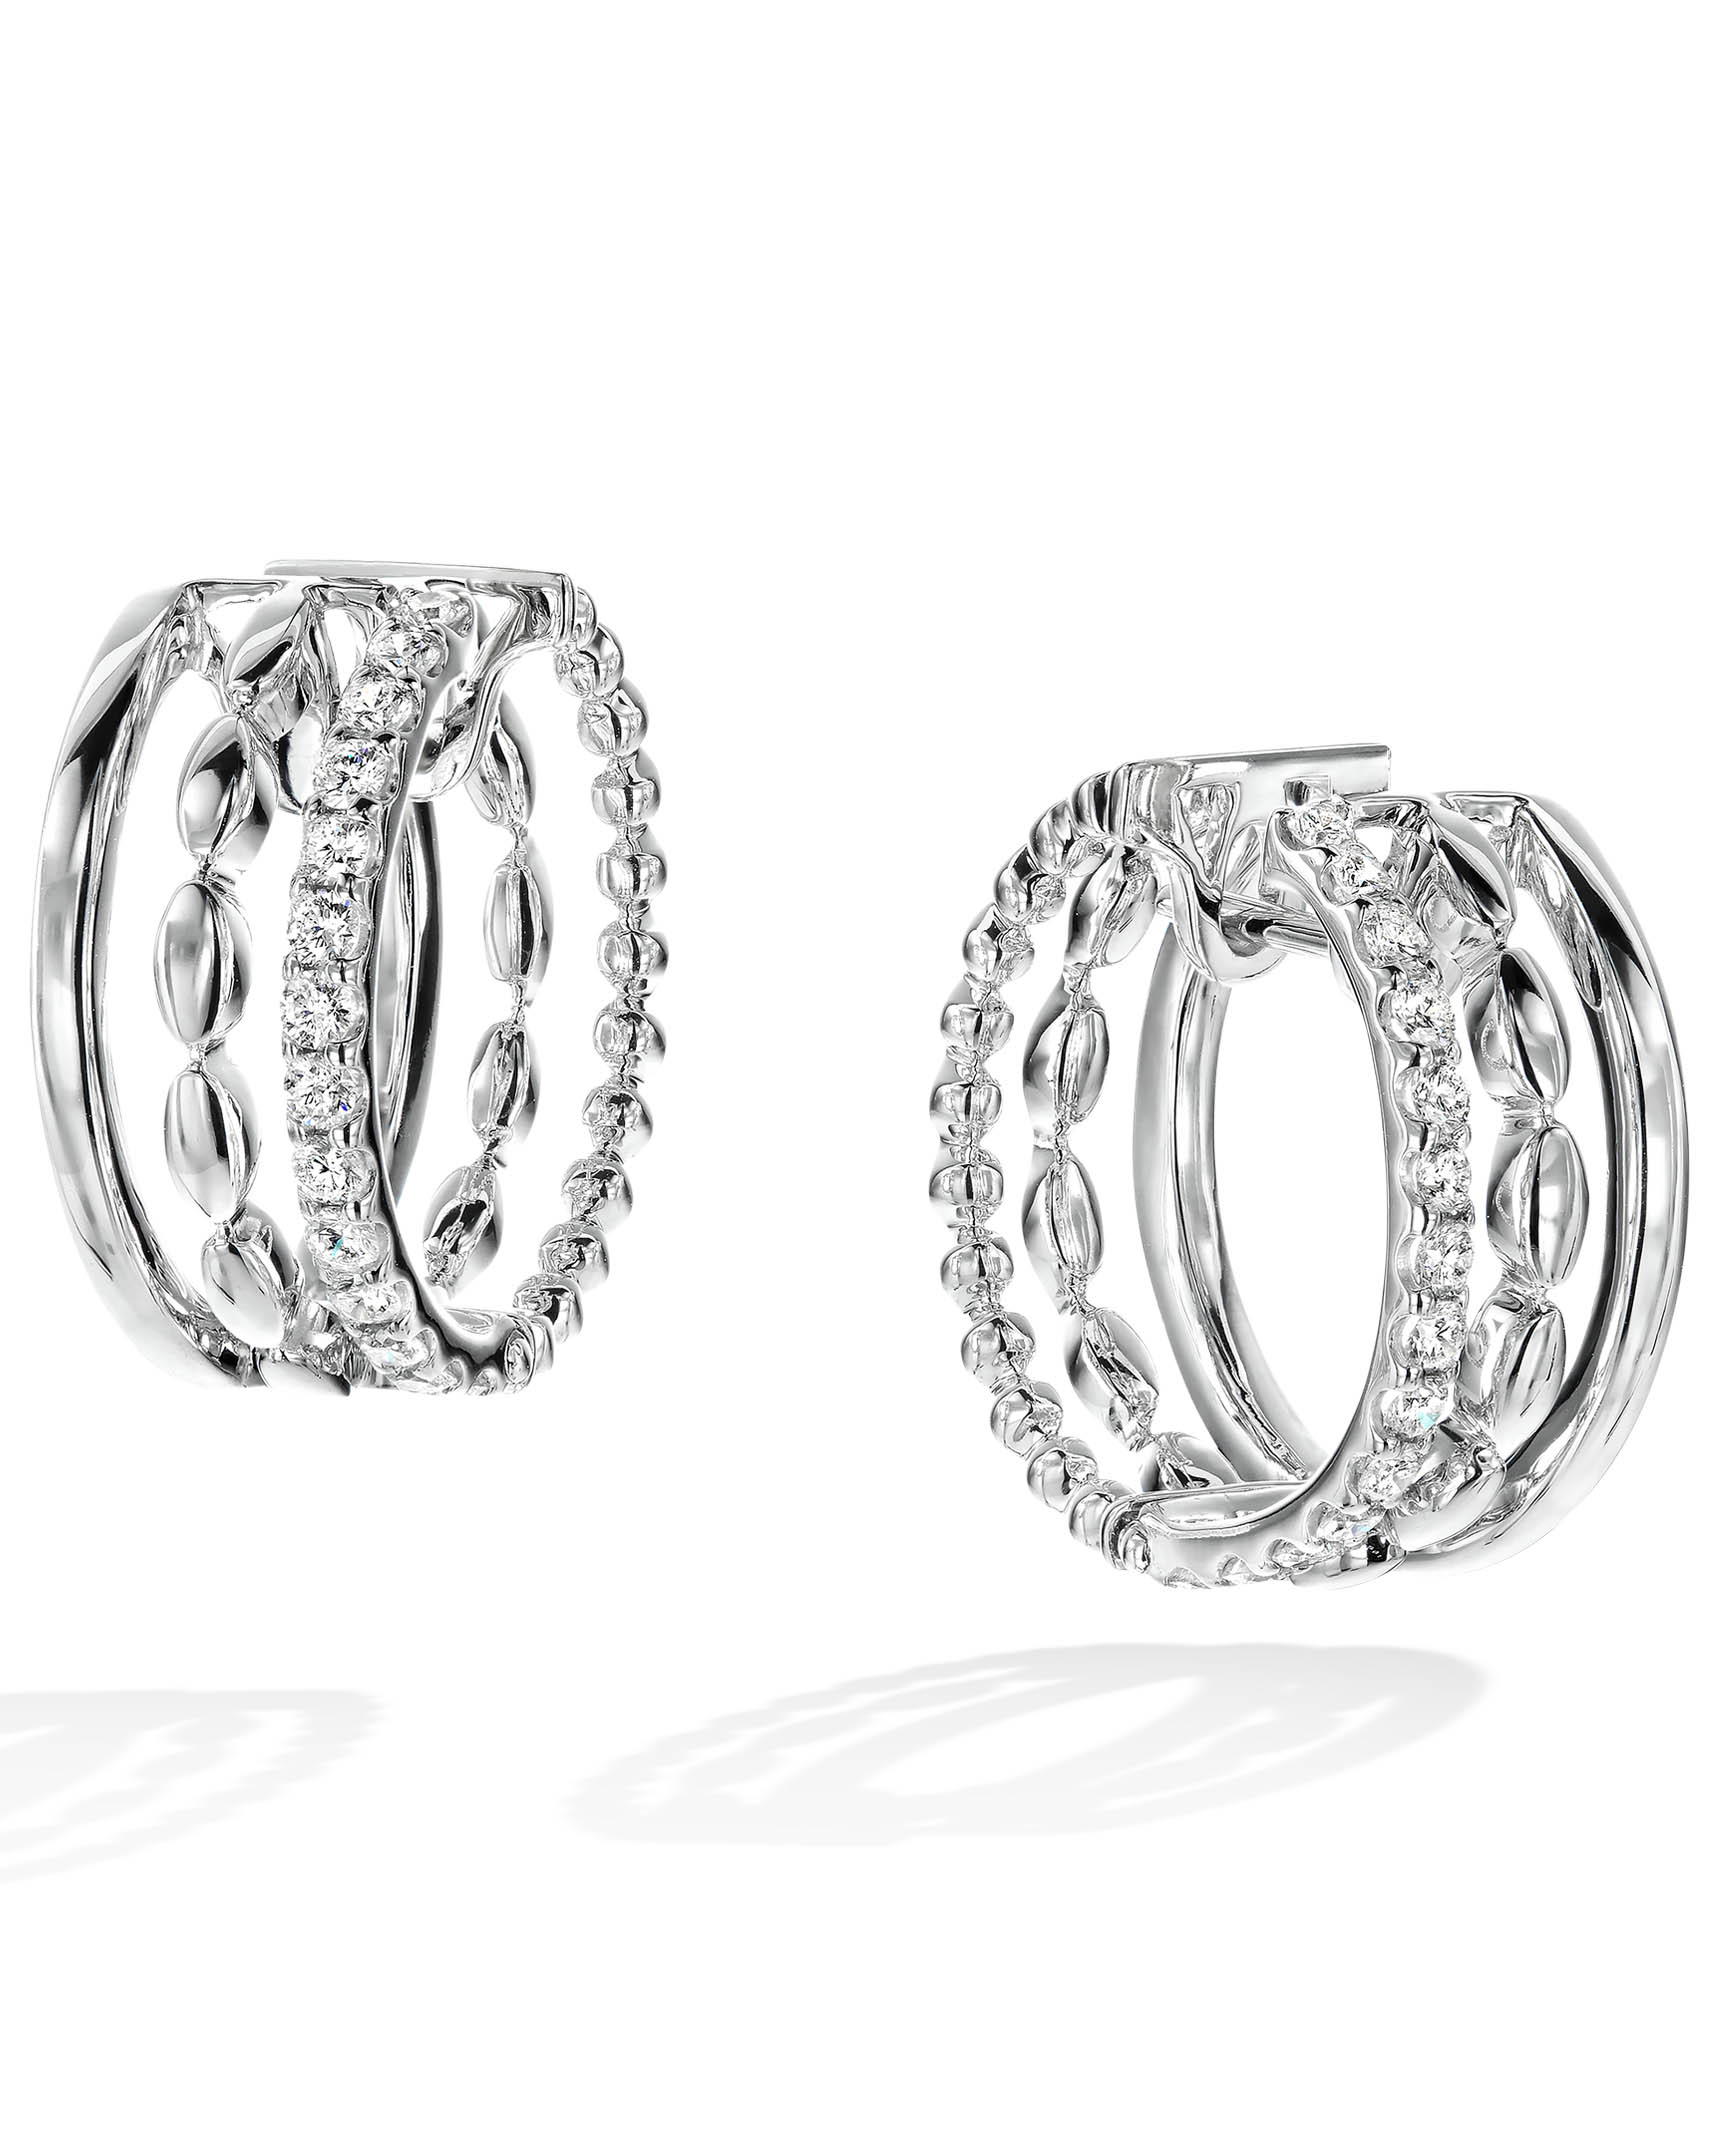 1.01CTTW Marquise and Round Diamond Fancy Hoop Earrings in White Gold | New  York Jewelers Chicago